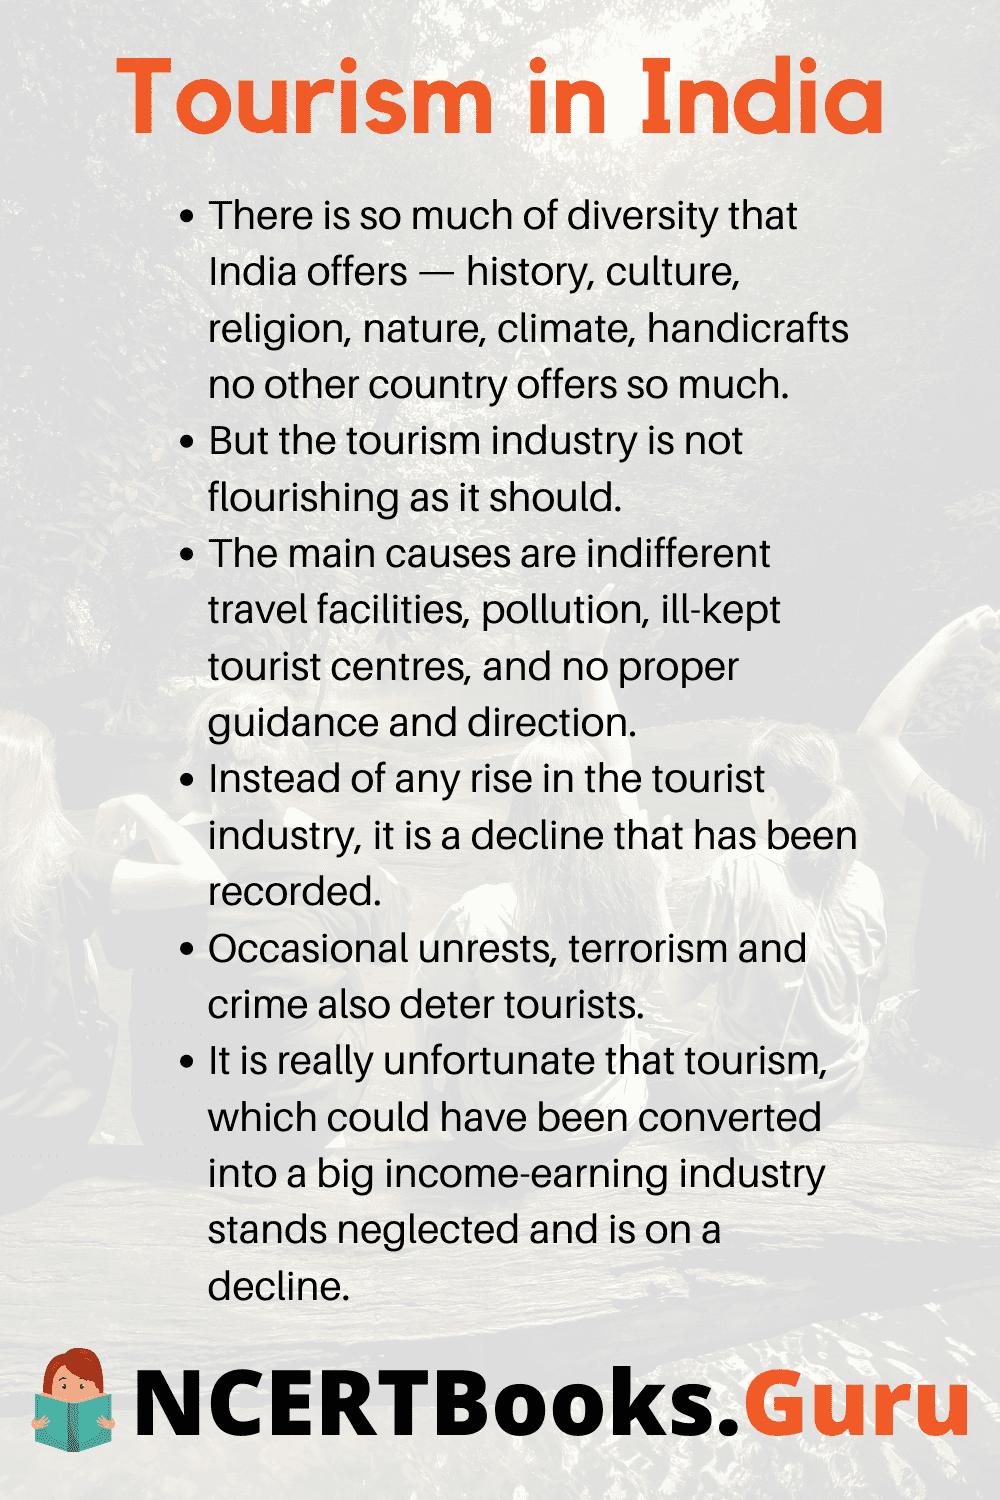 tourism in india short note